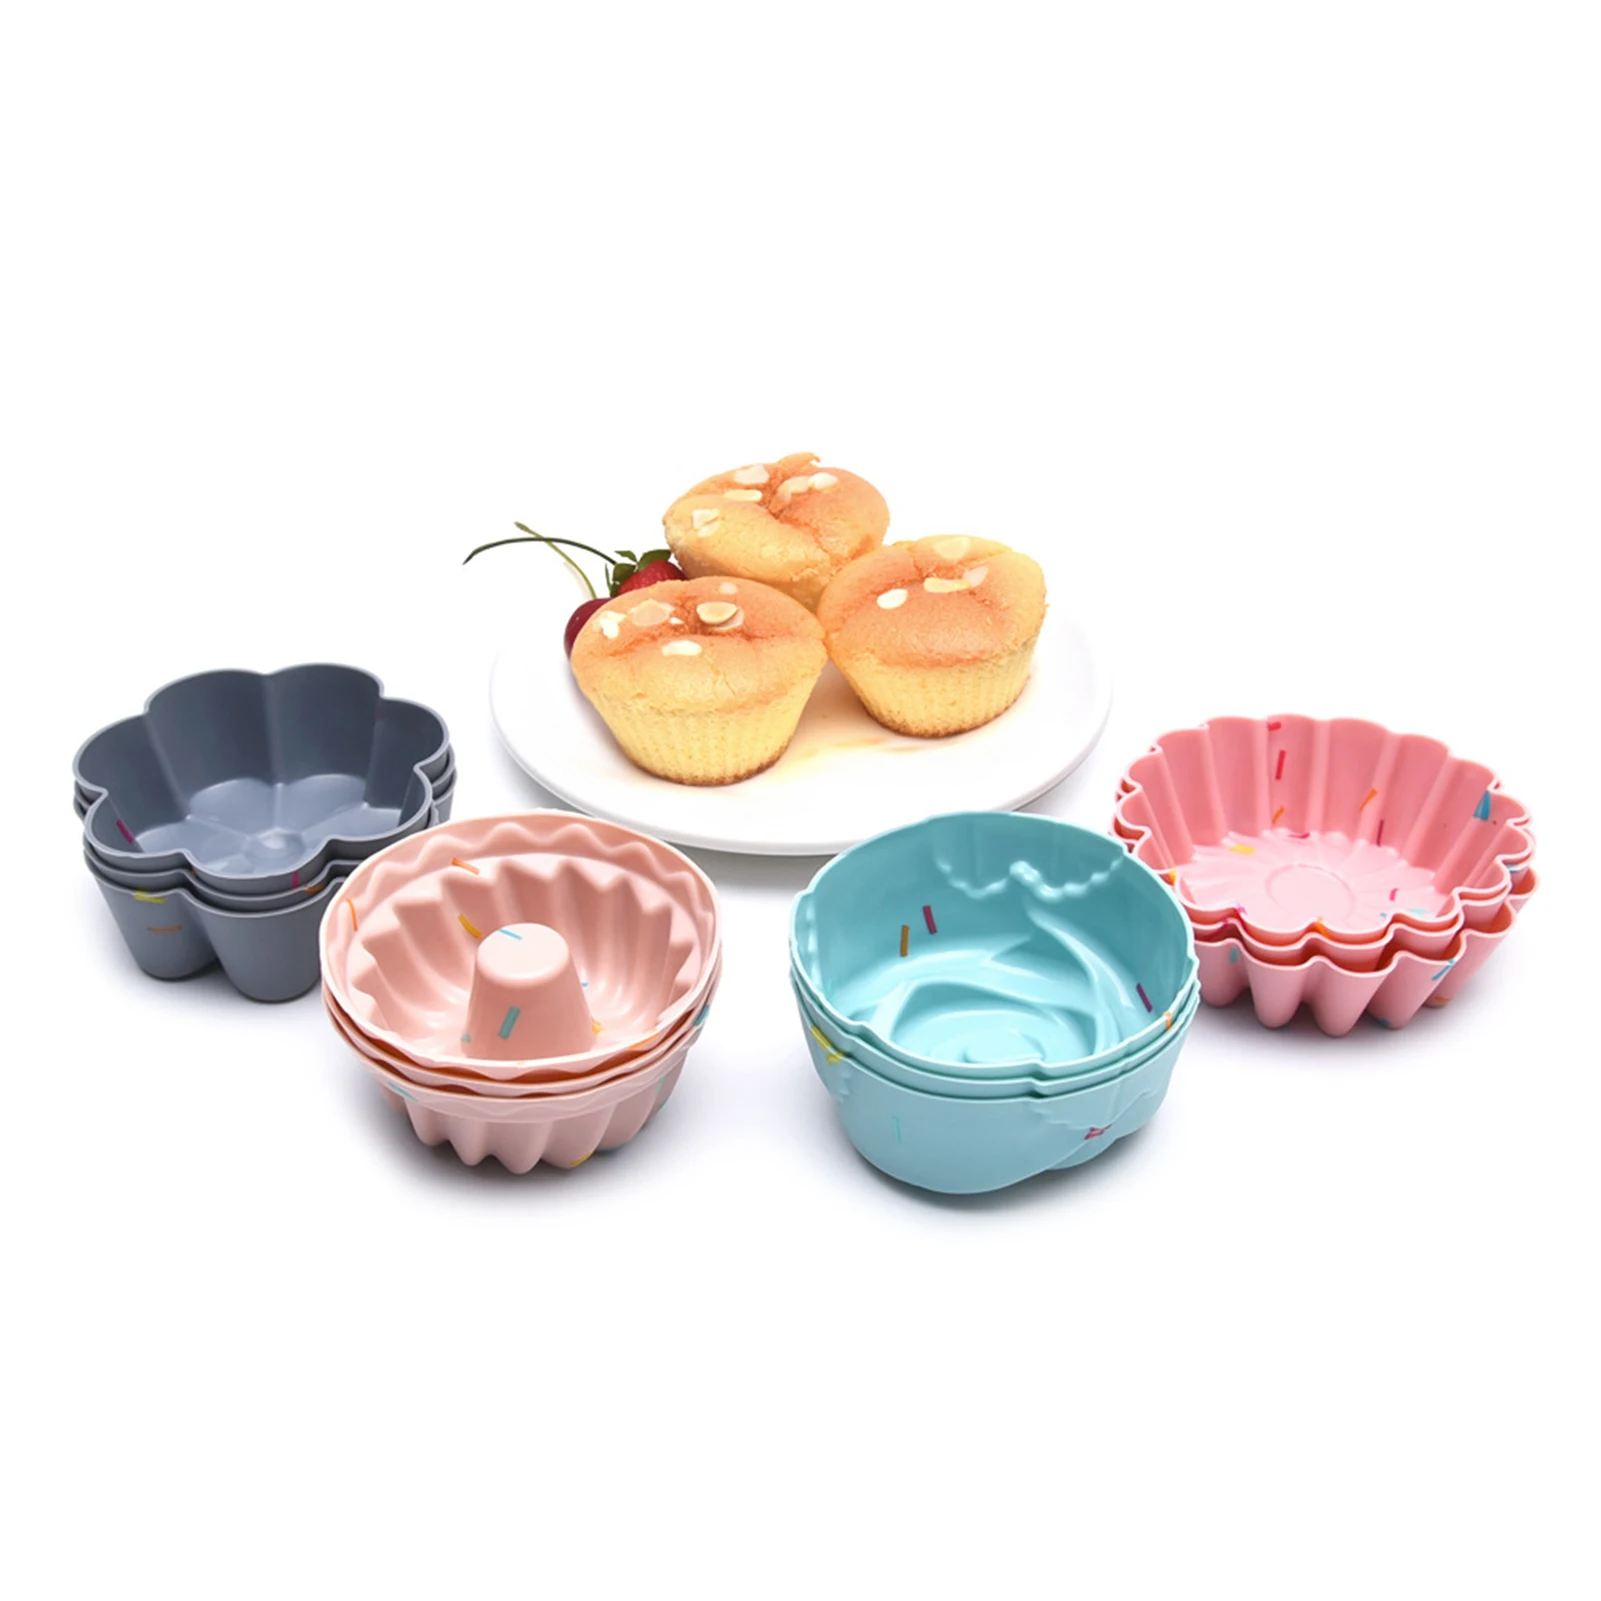 

Pack of 12 Silicone Baking Cups 4 Different Shapes Muffin Cake Soft Casting Die Fondant & Gum Paste Molds wzpi